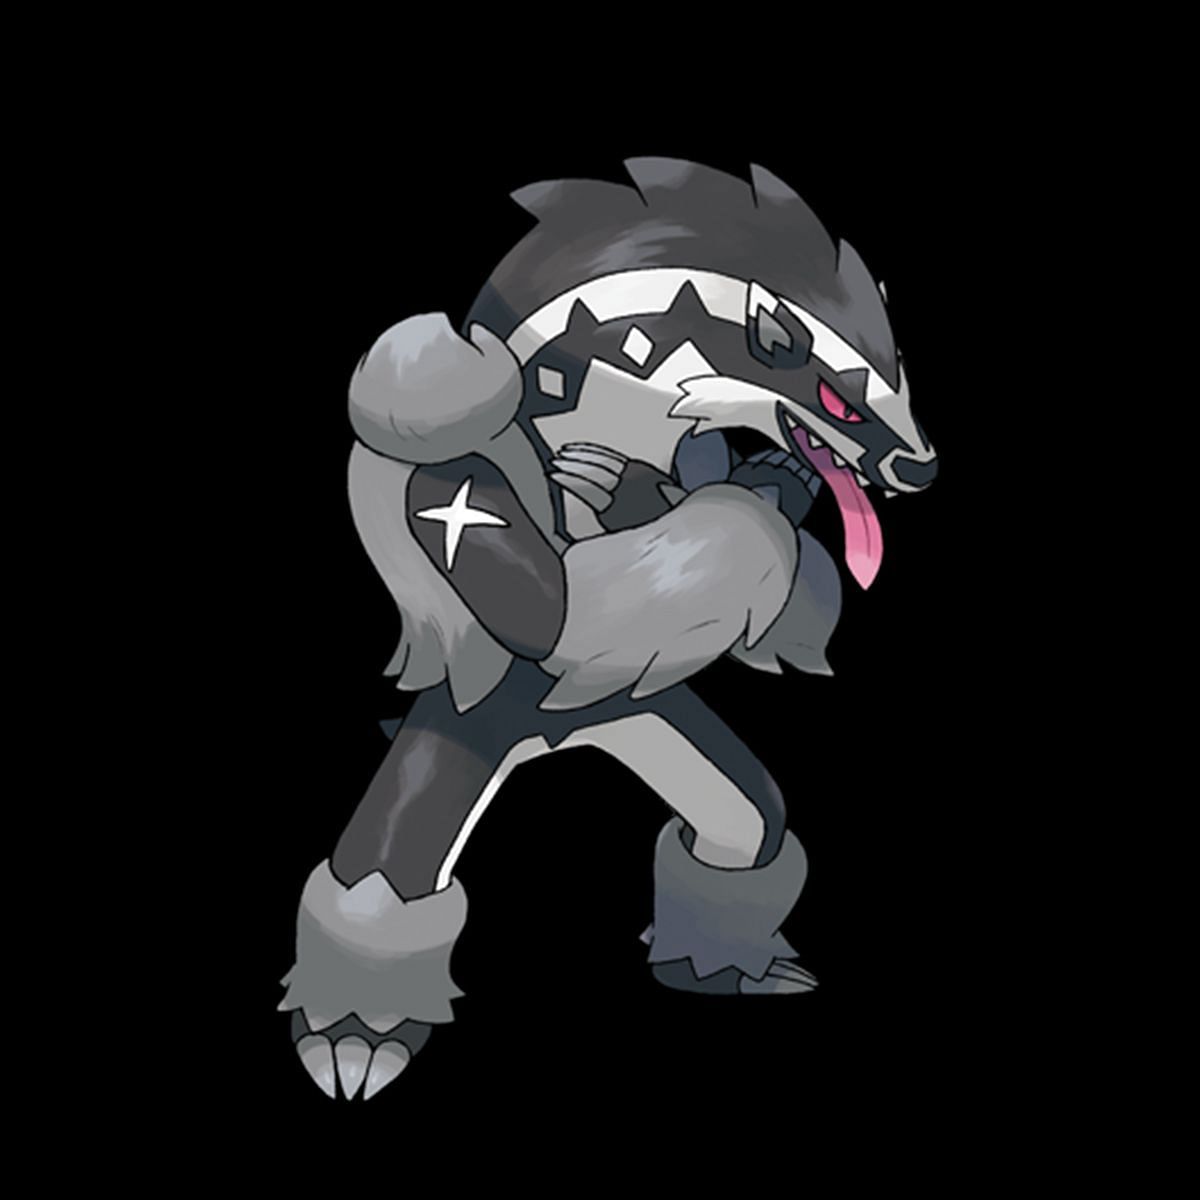 Obstagoon up for participation in the Ultra League (Image via The Pok&eacute;mon Company)